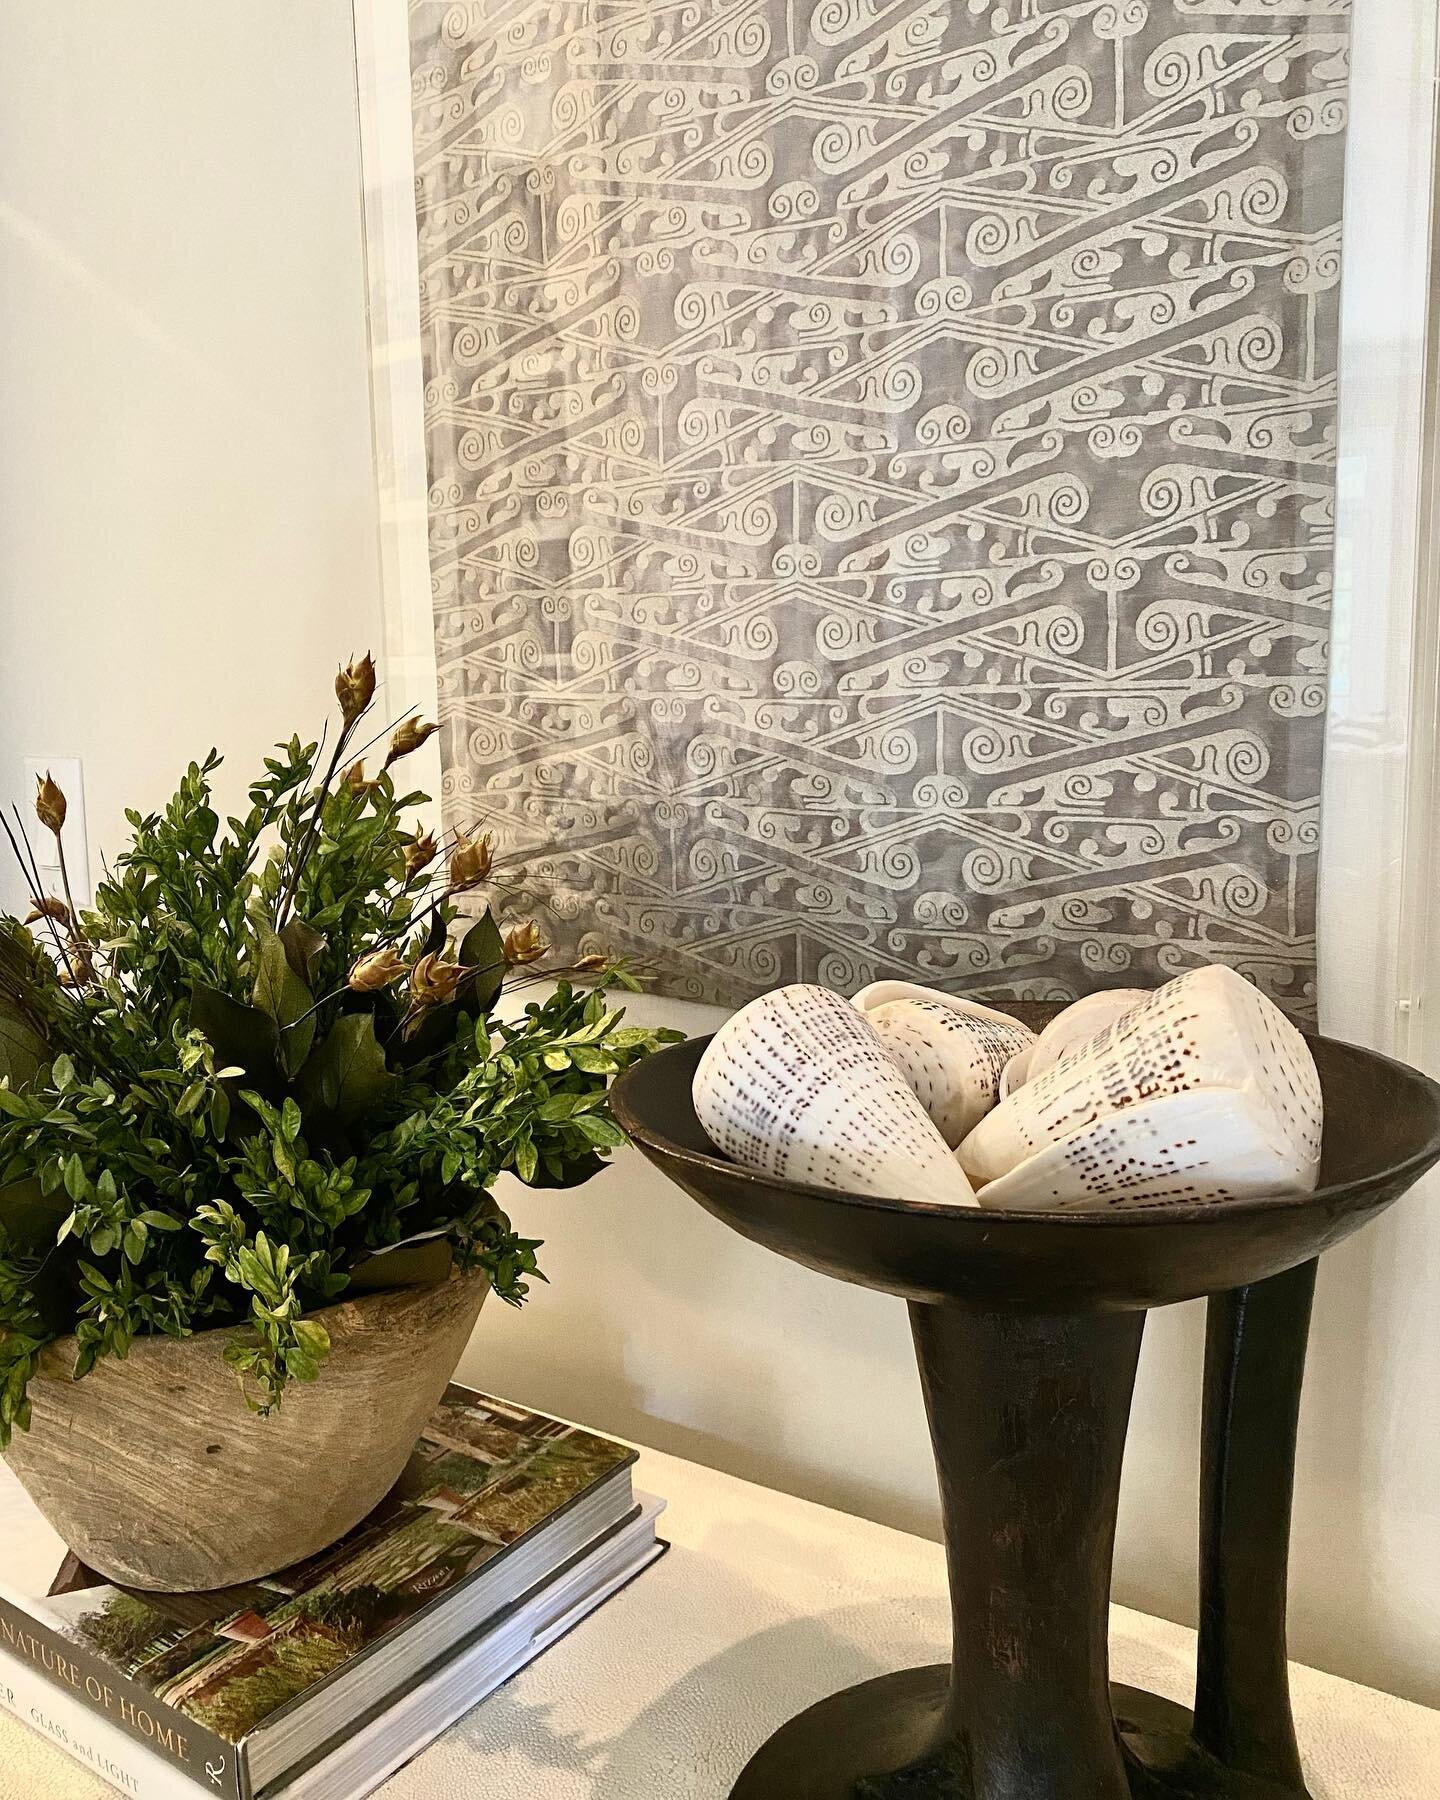 We love how this Fortuny fabric turned out in an acrylic box with a linen liner. 
What a beautiful way to appreciate a special, unique application. 🤩
.
.
.
#interiordesign #entryhall #interiordecor #framedfabric #interiorphilosophy #interiorphilosop